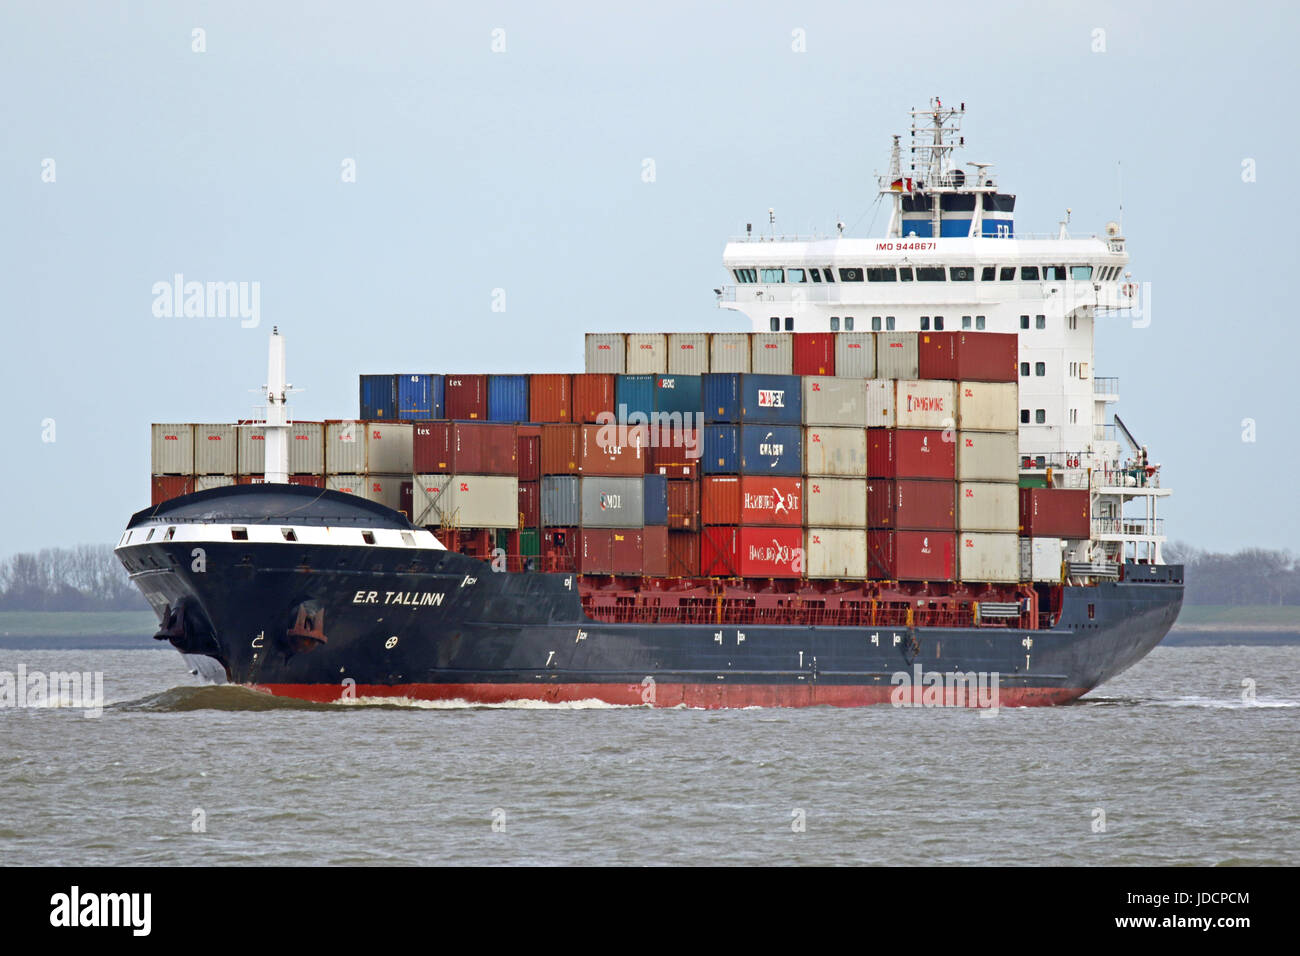 The container ship E.R. Tallinn on the schelde river passing Terneuzen on the way to the north sea. Stock Photo